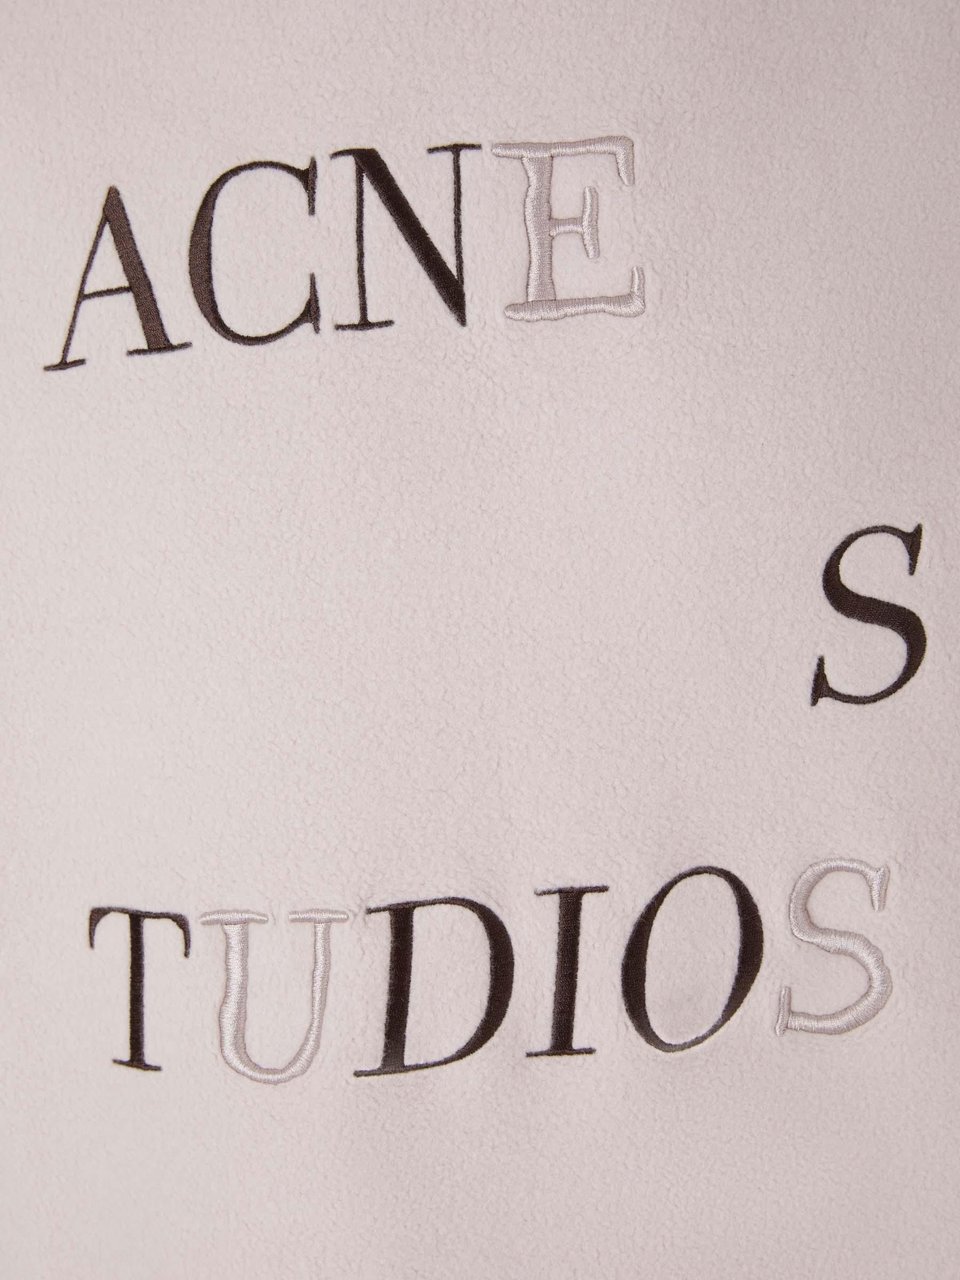 Acne Studios Embroidered Logo T-Shirt Paars